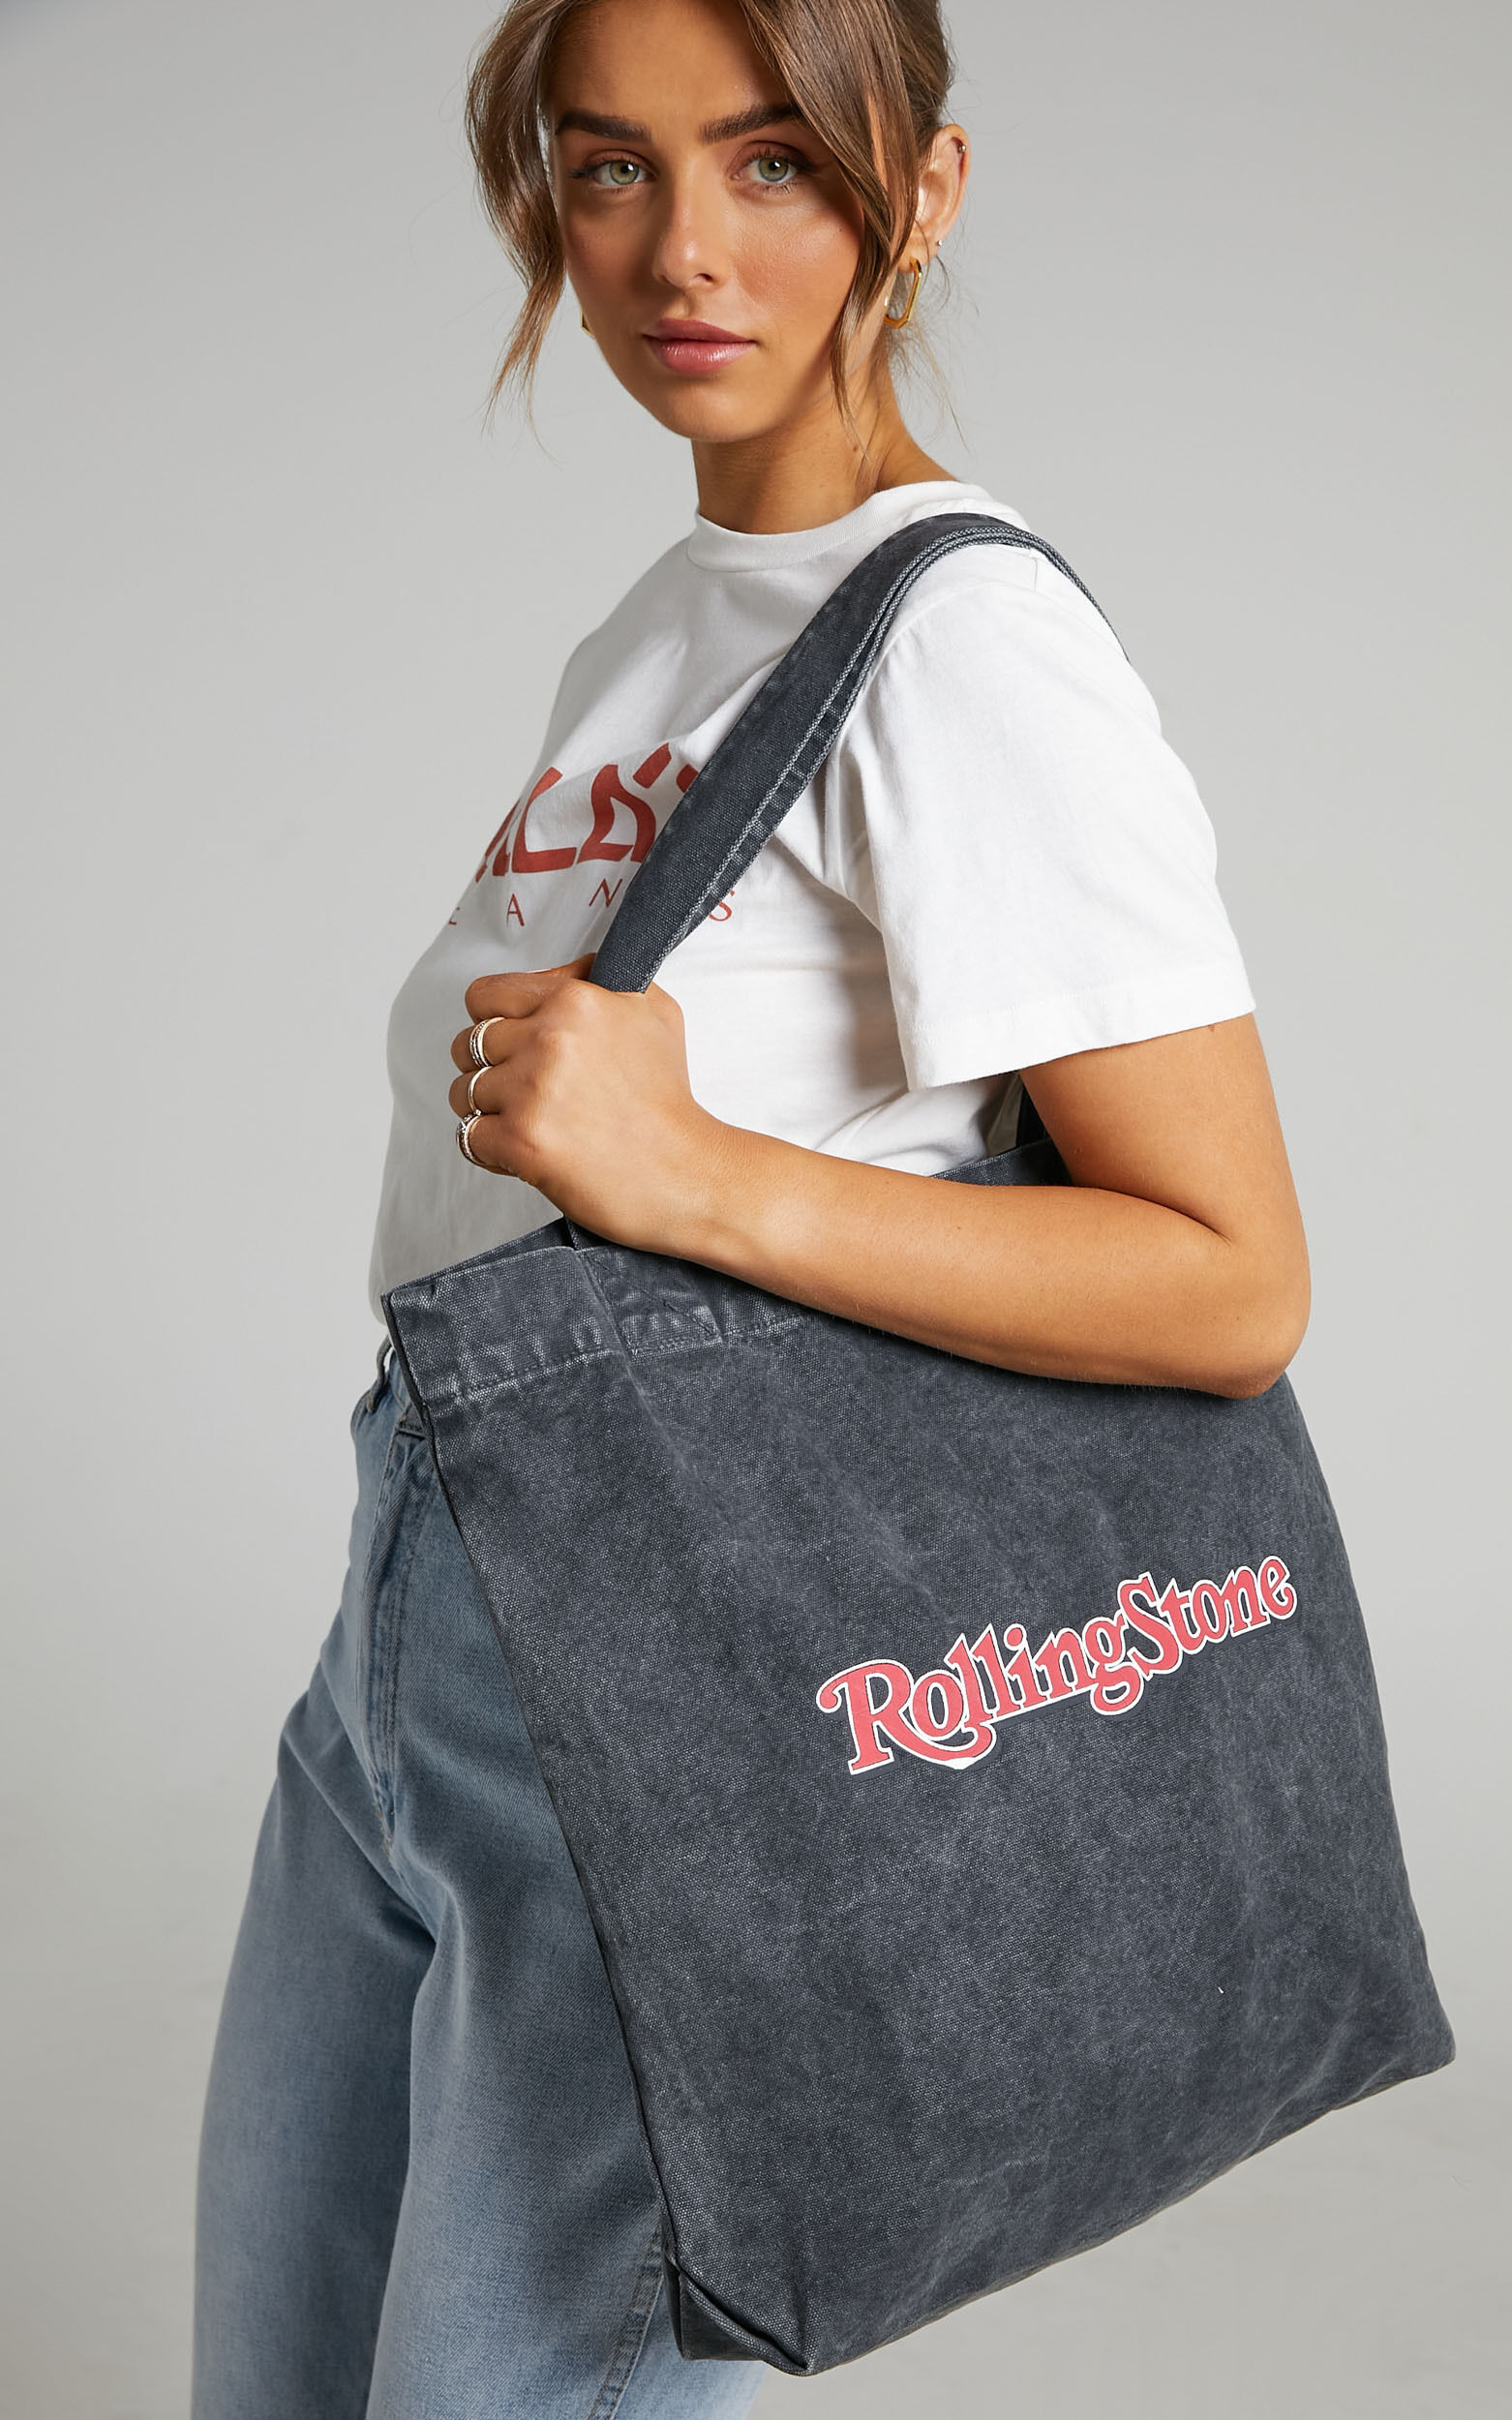 Rolla's - Rolling Stone 1981 Tote in Washed Black - NoSize, BLK1, super-hi-res image number null